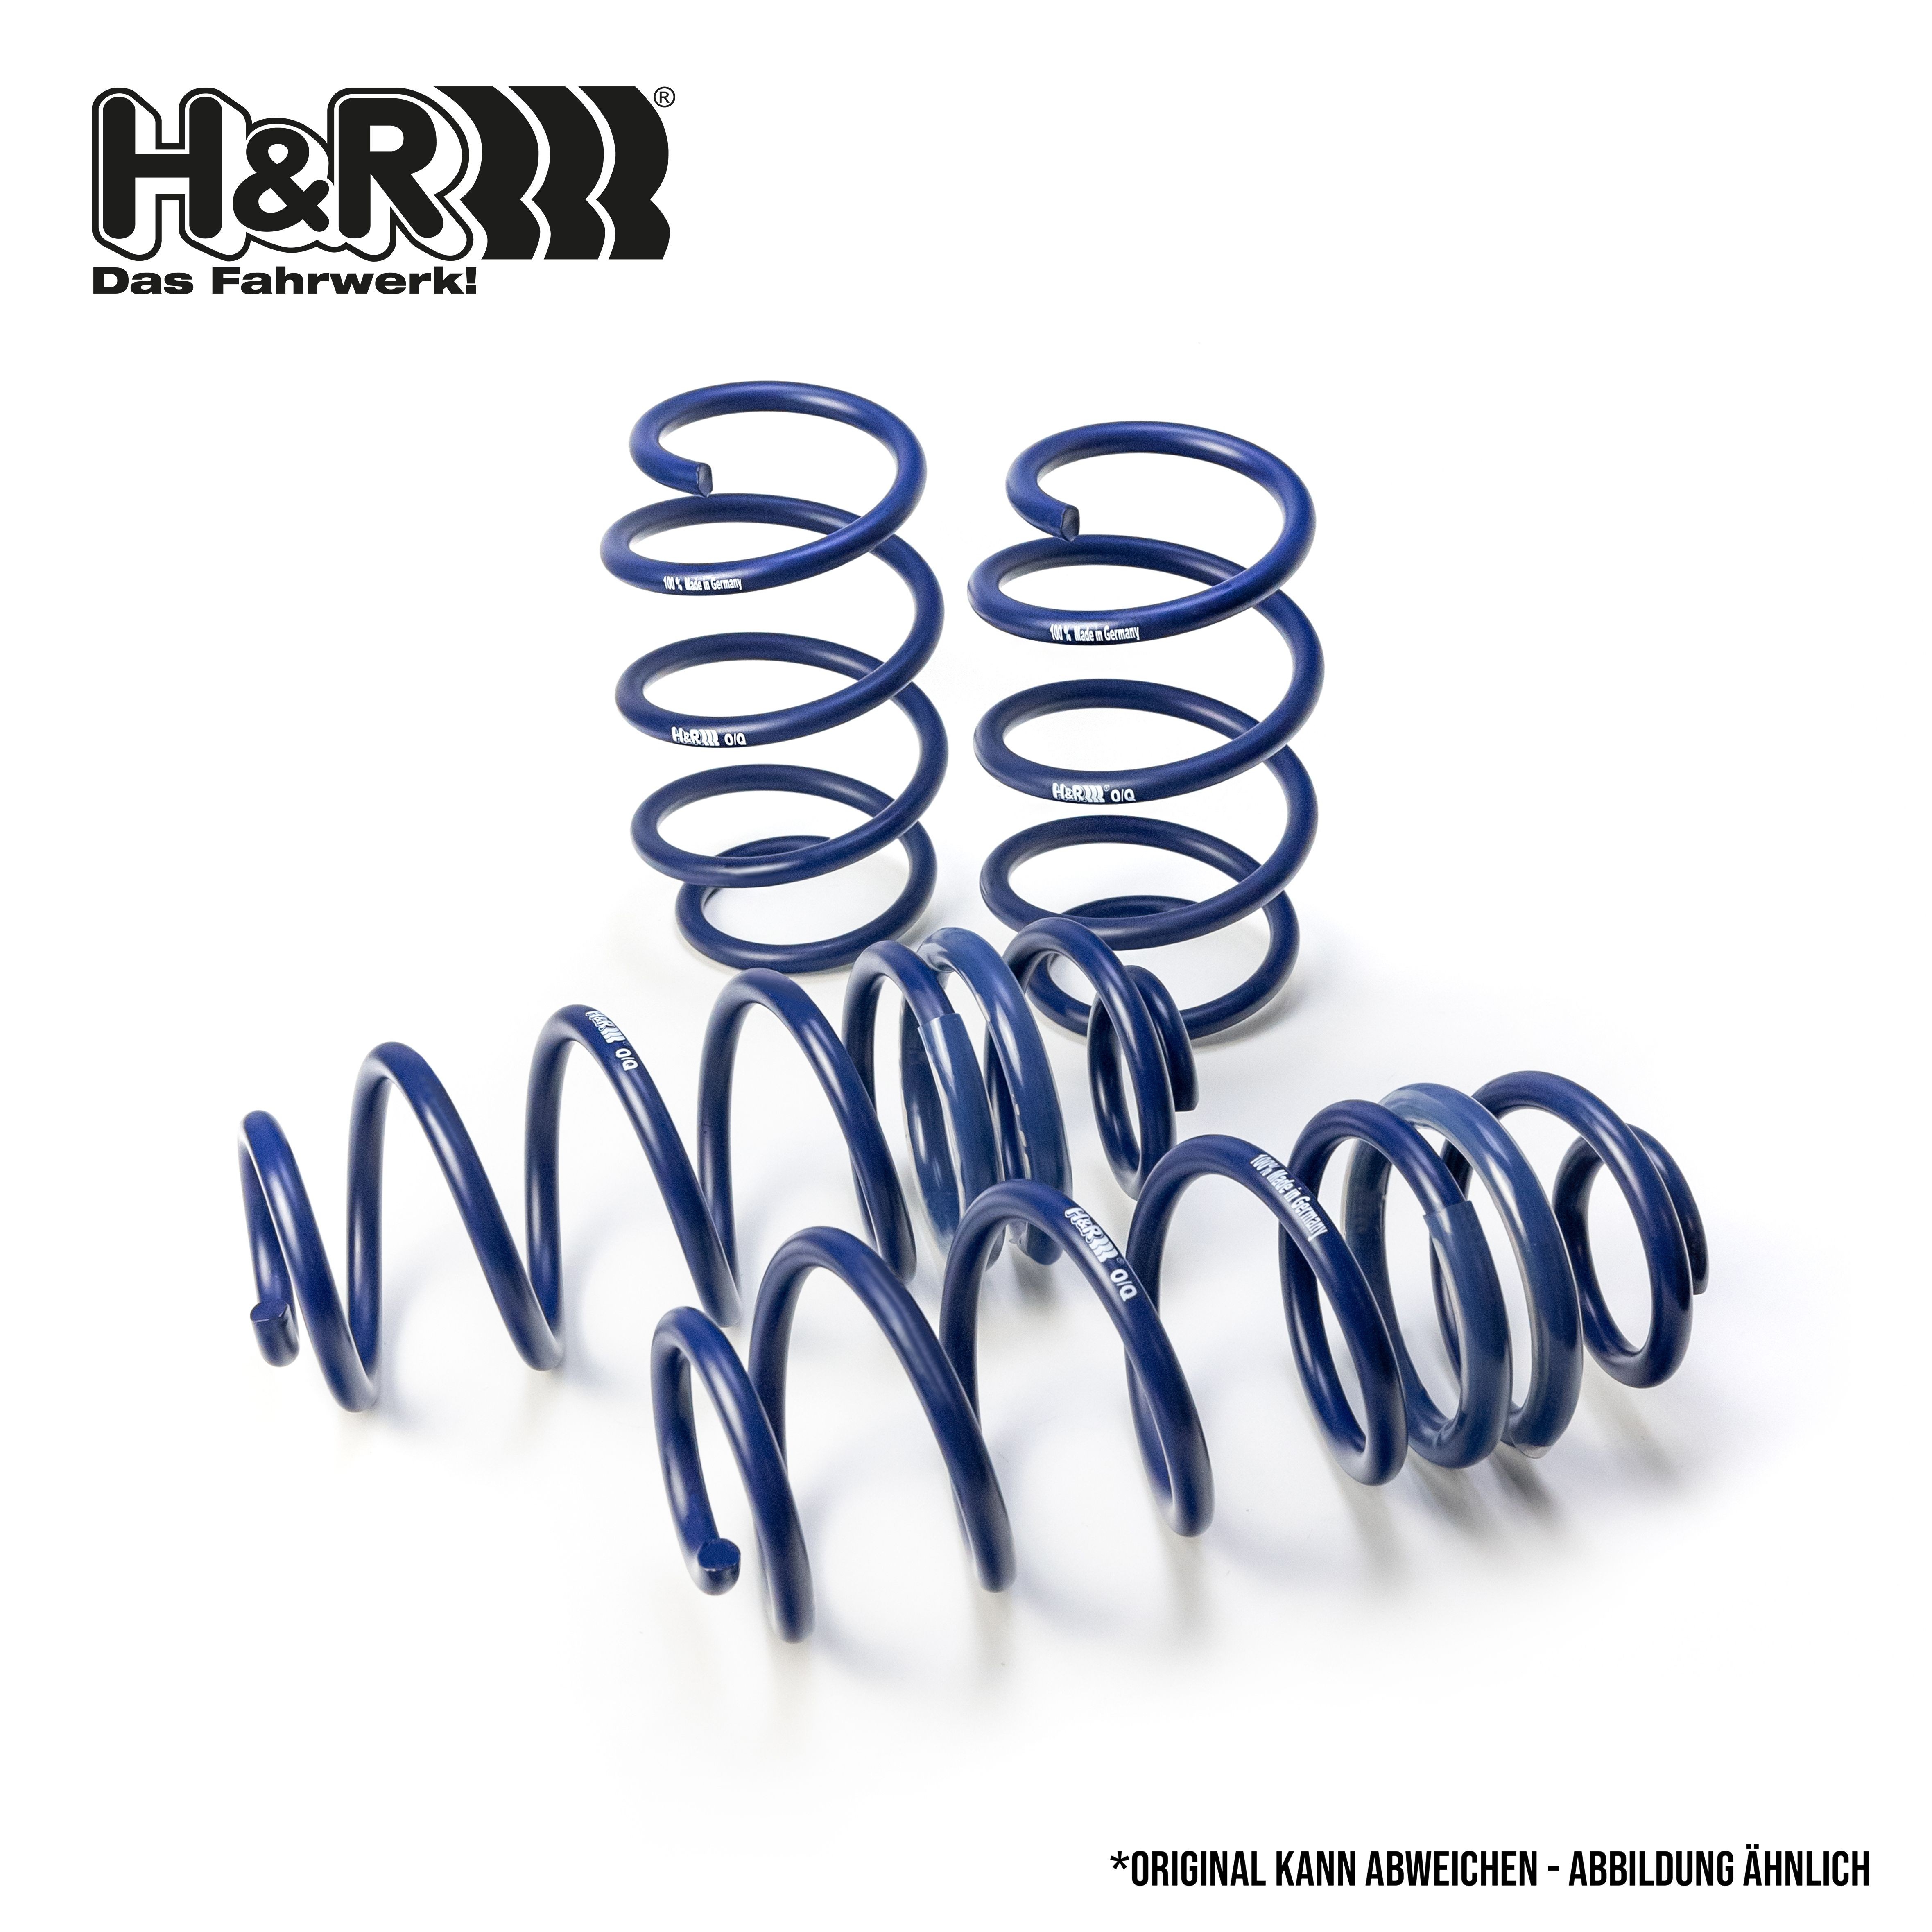 H&R Spring kit 29724-3 suitable for Mercedes S210